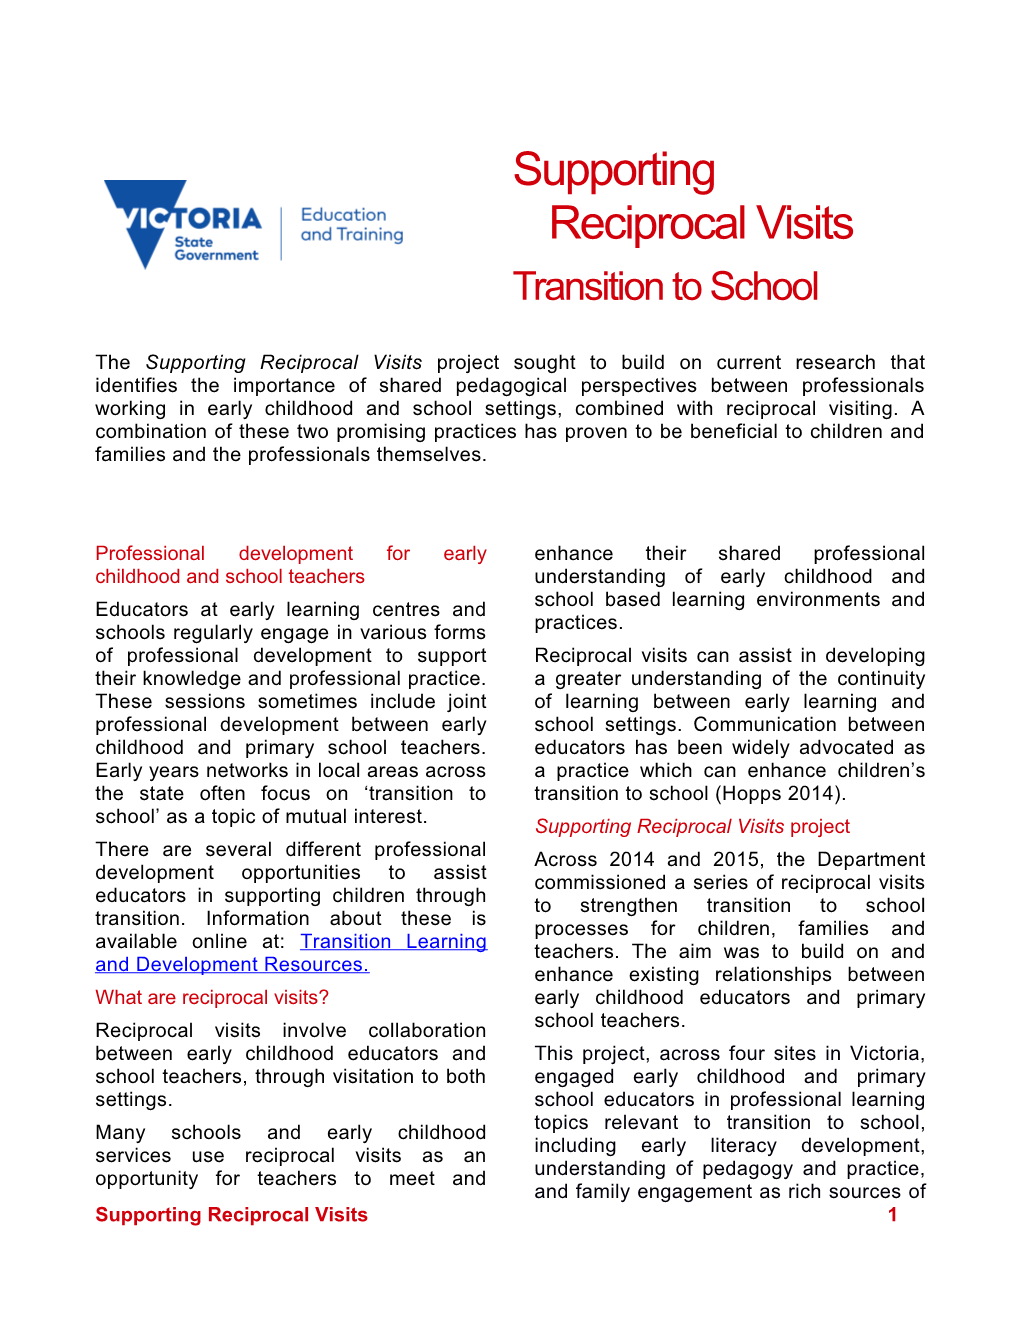 Supporting Reciprocal Visits, Transition to School